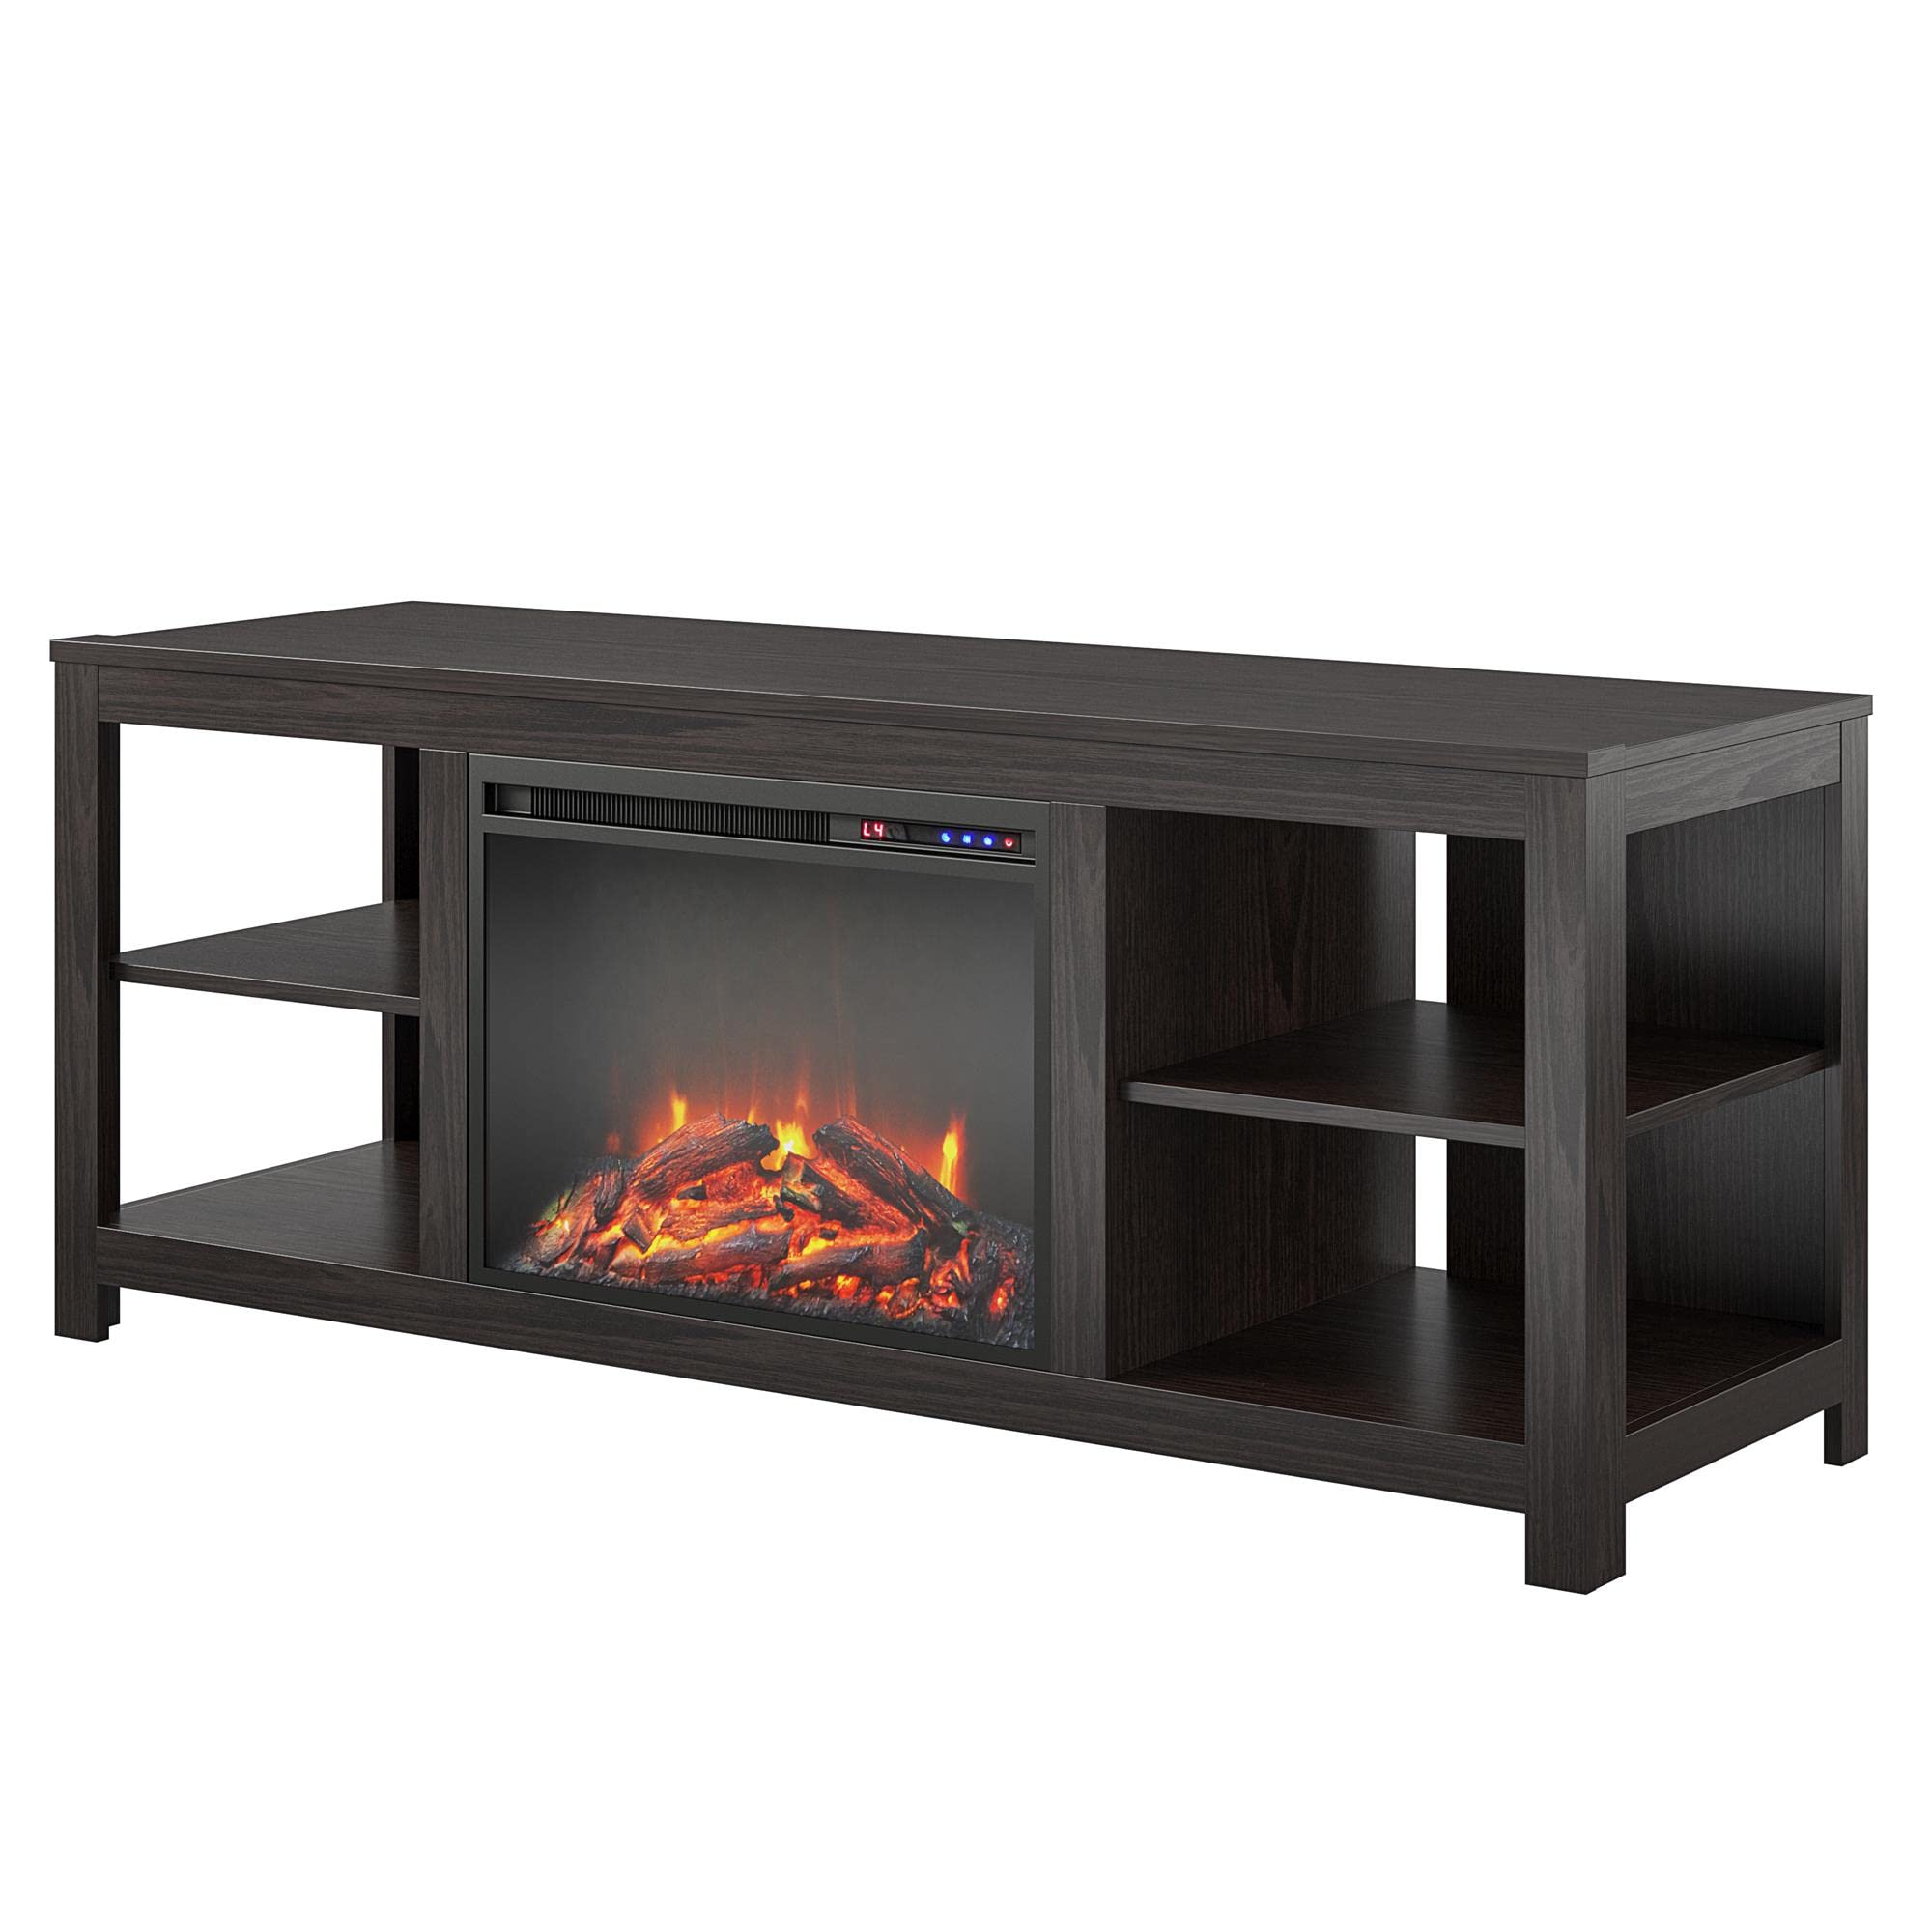 Ameriwood Home Melville Electric Fireplace Console Stand for TVs up to 74", Espresso